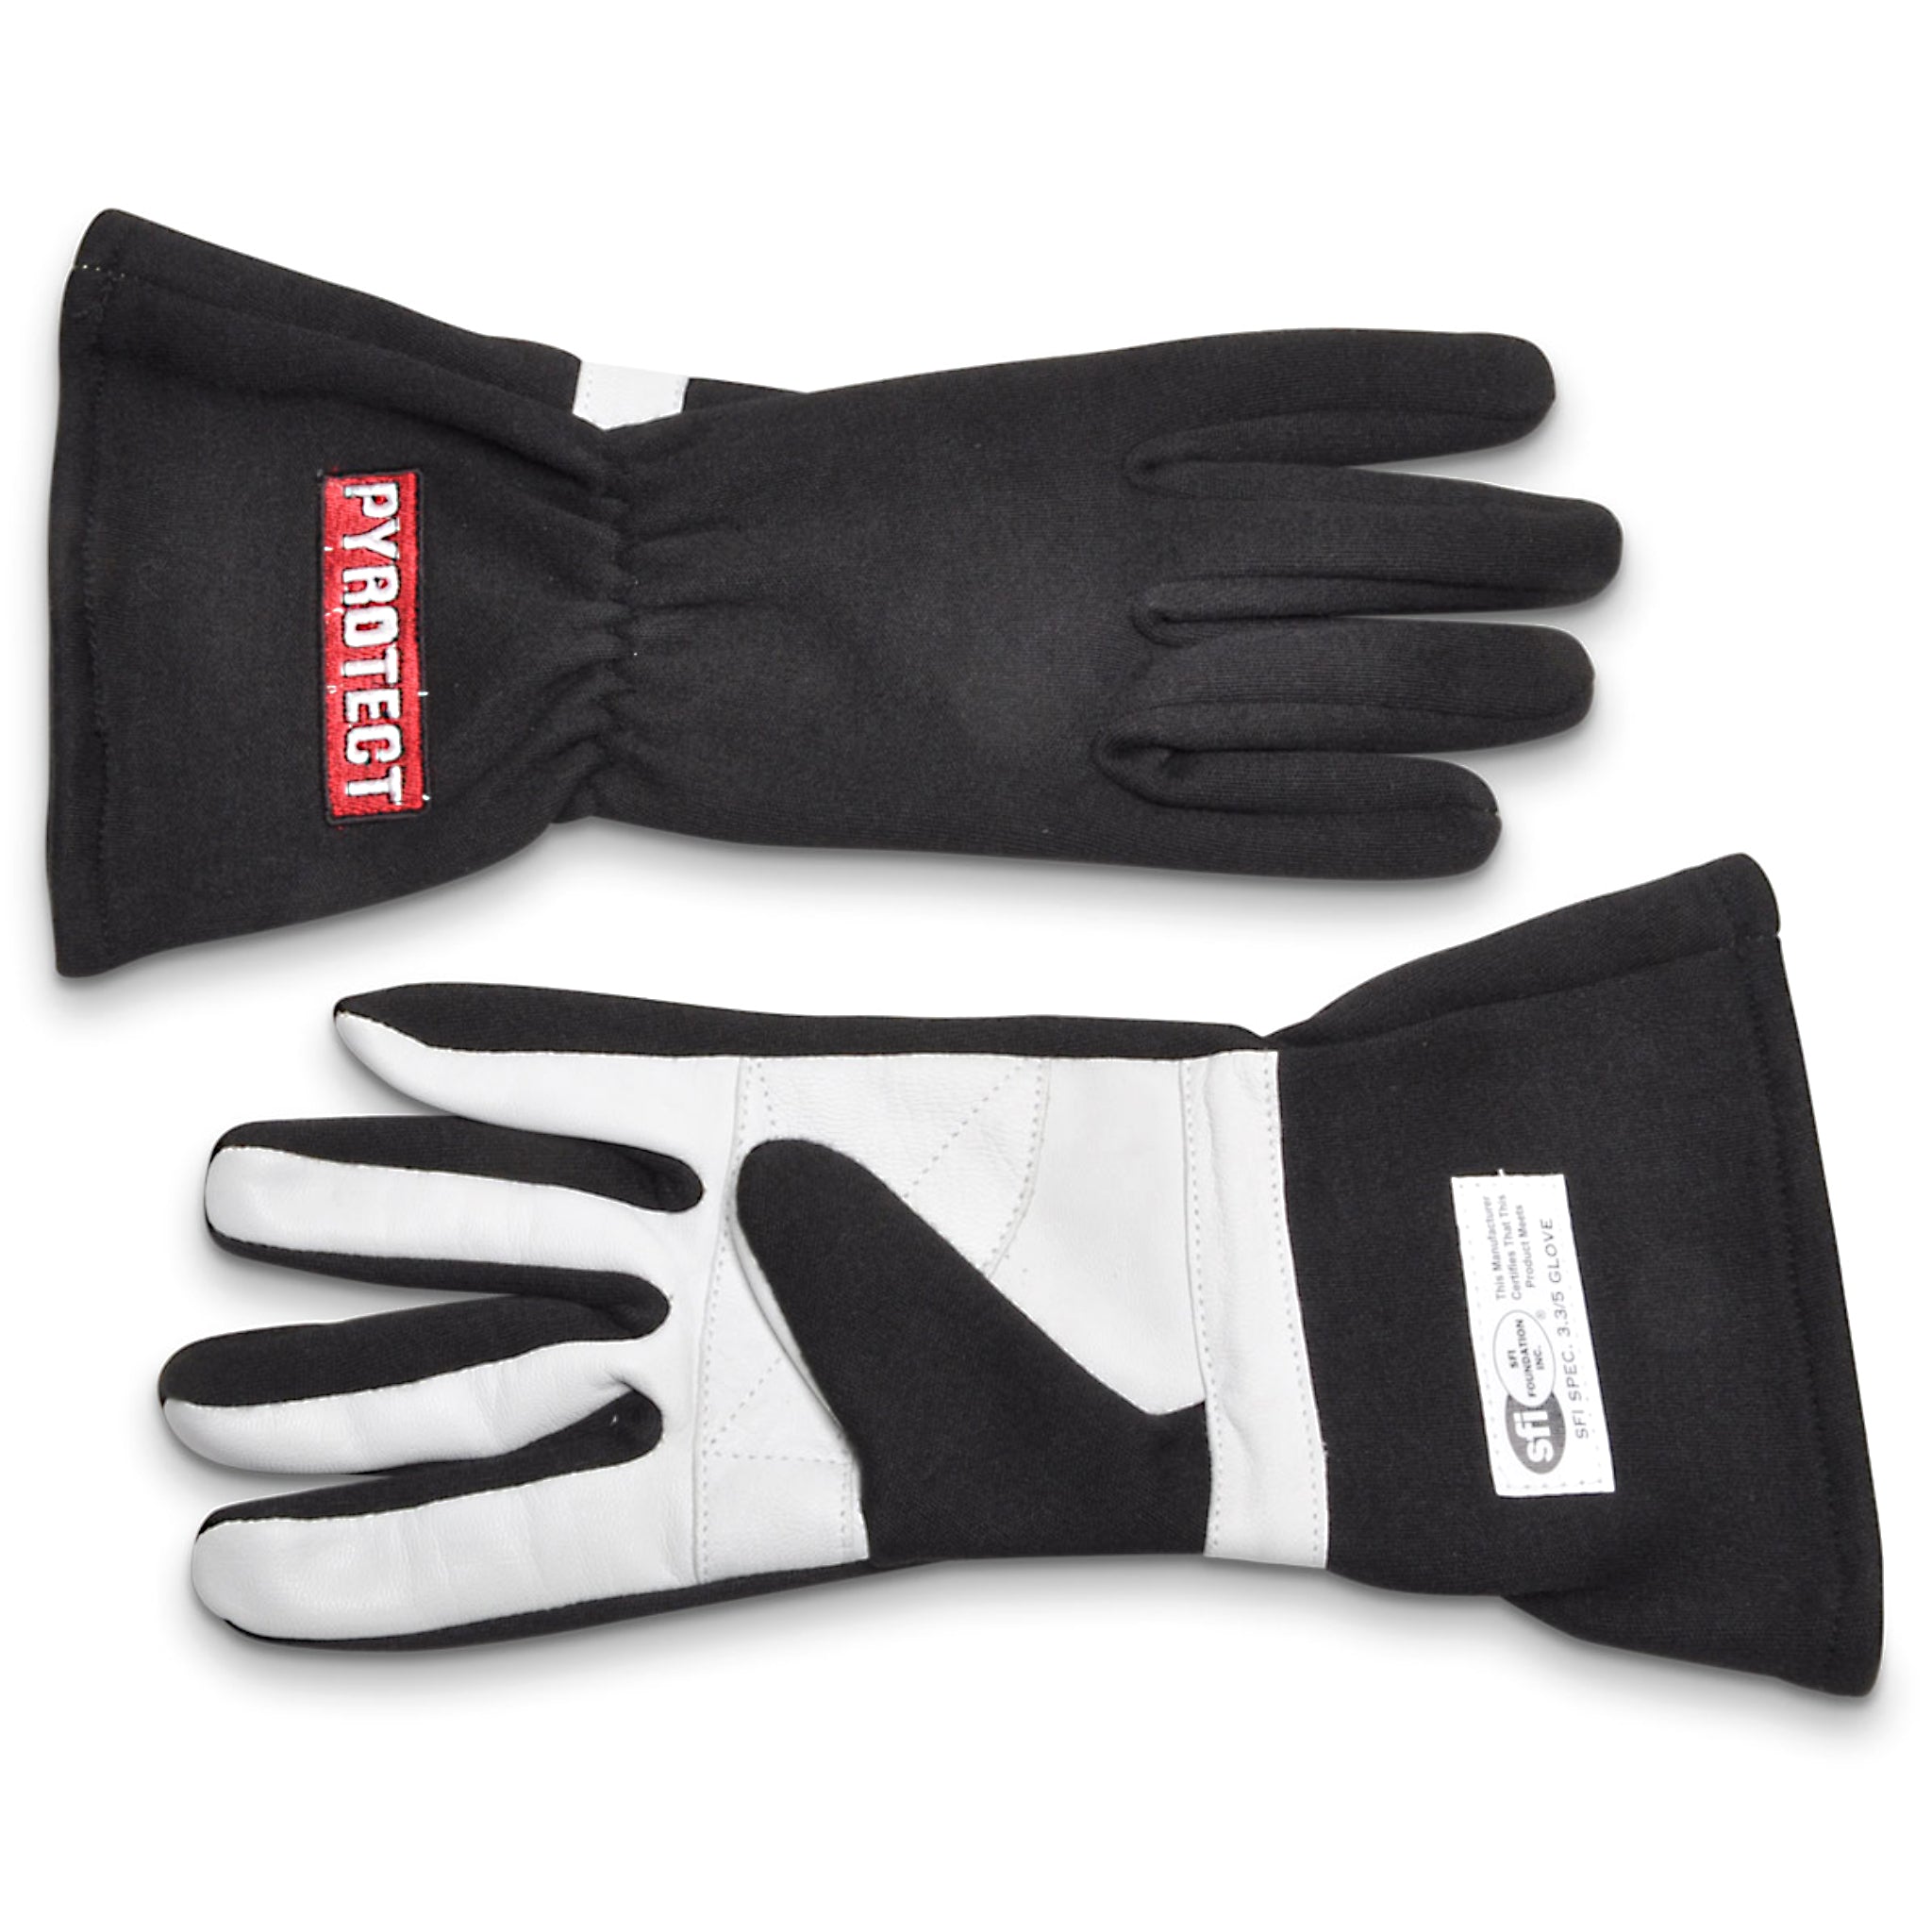 Pyrotect Glove Sport 2 Layer Blk Large SFI-5 Safety Clothing Driving Gloves main image